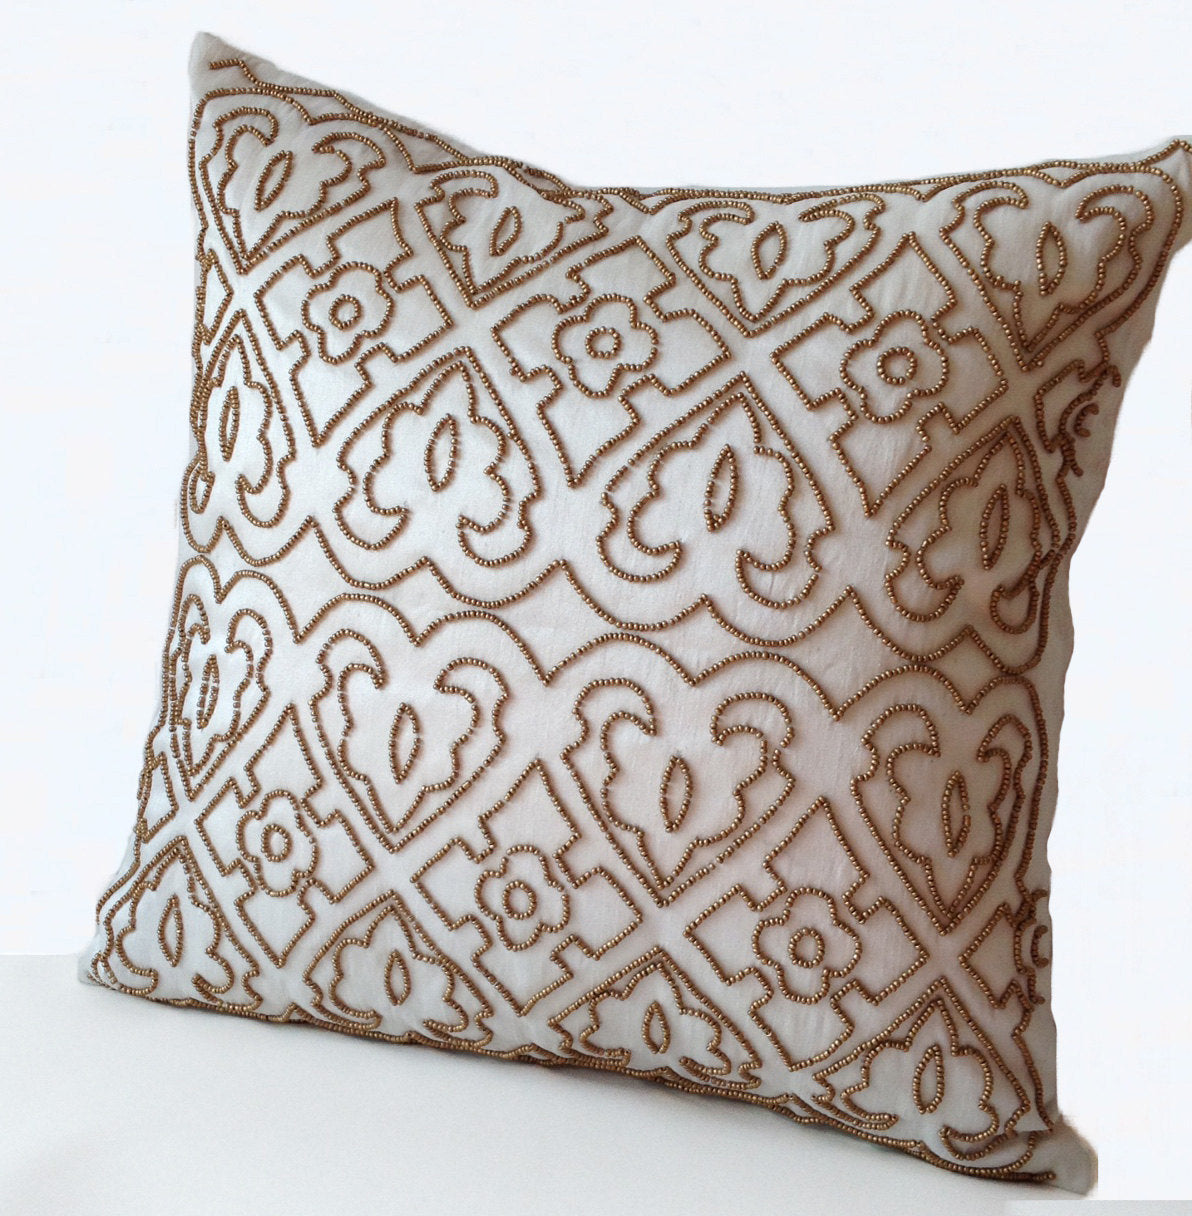 Amore Beaute Gold pillow inspired by the glamour and sumptuous patterns loved by Maharajahs.